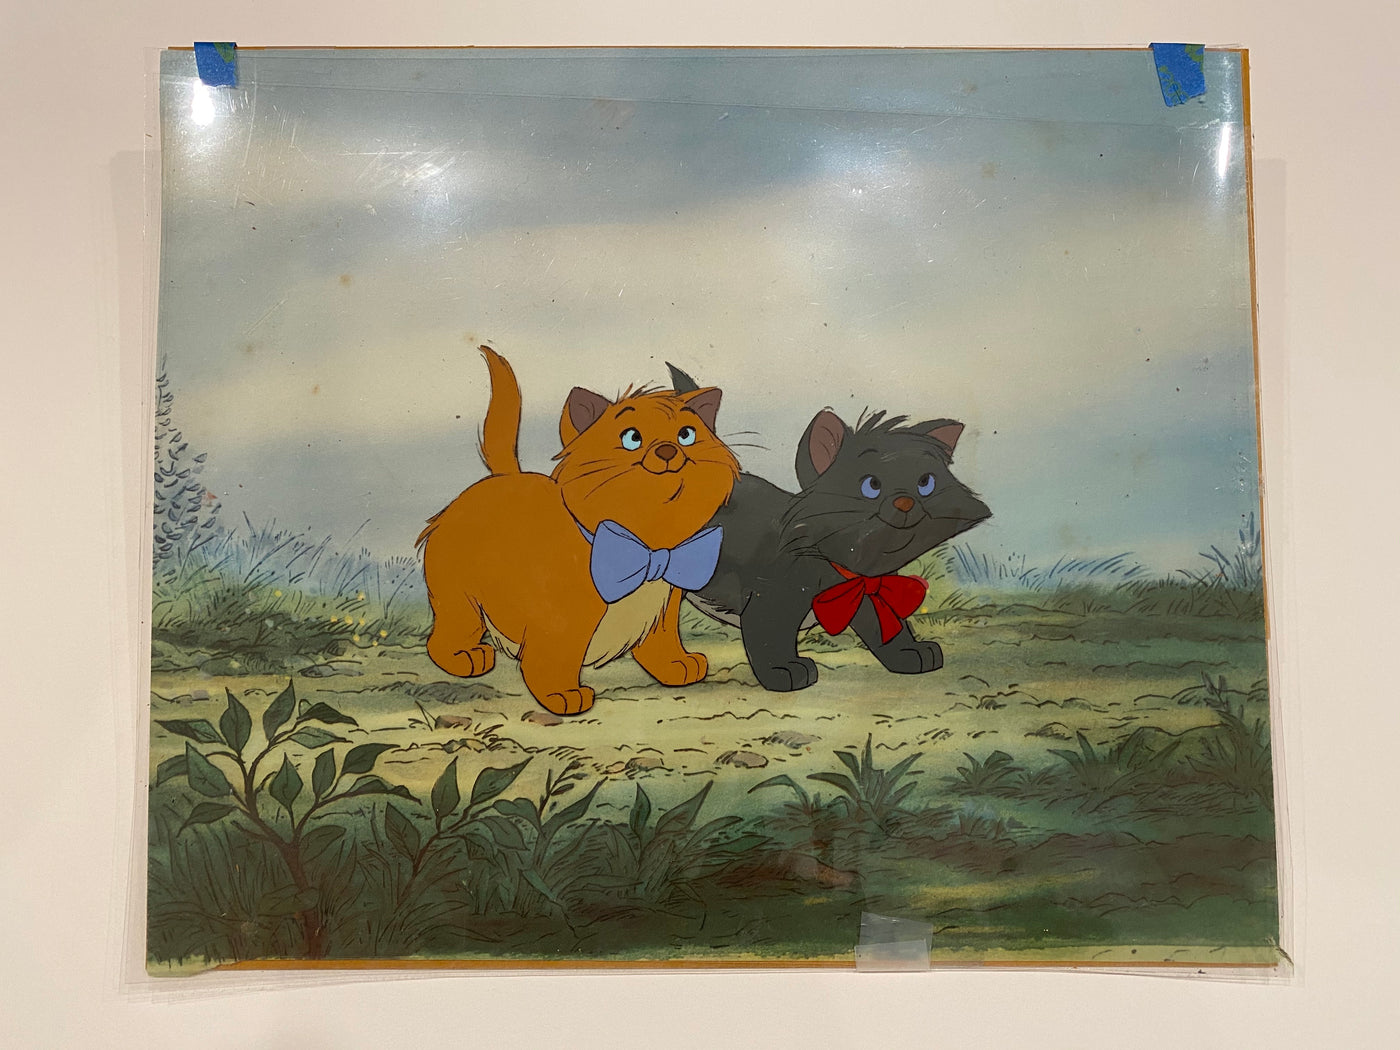 Original Walt Disney Production Cel from The Aristocats featuring Berlioz and Toulouse